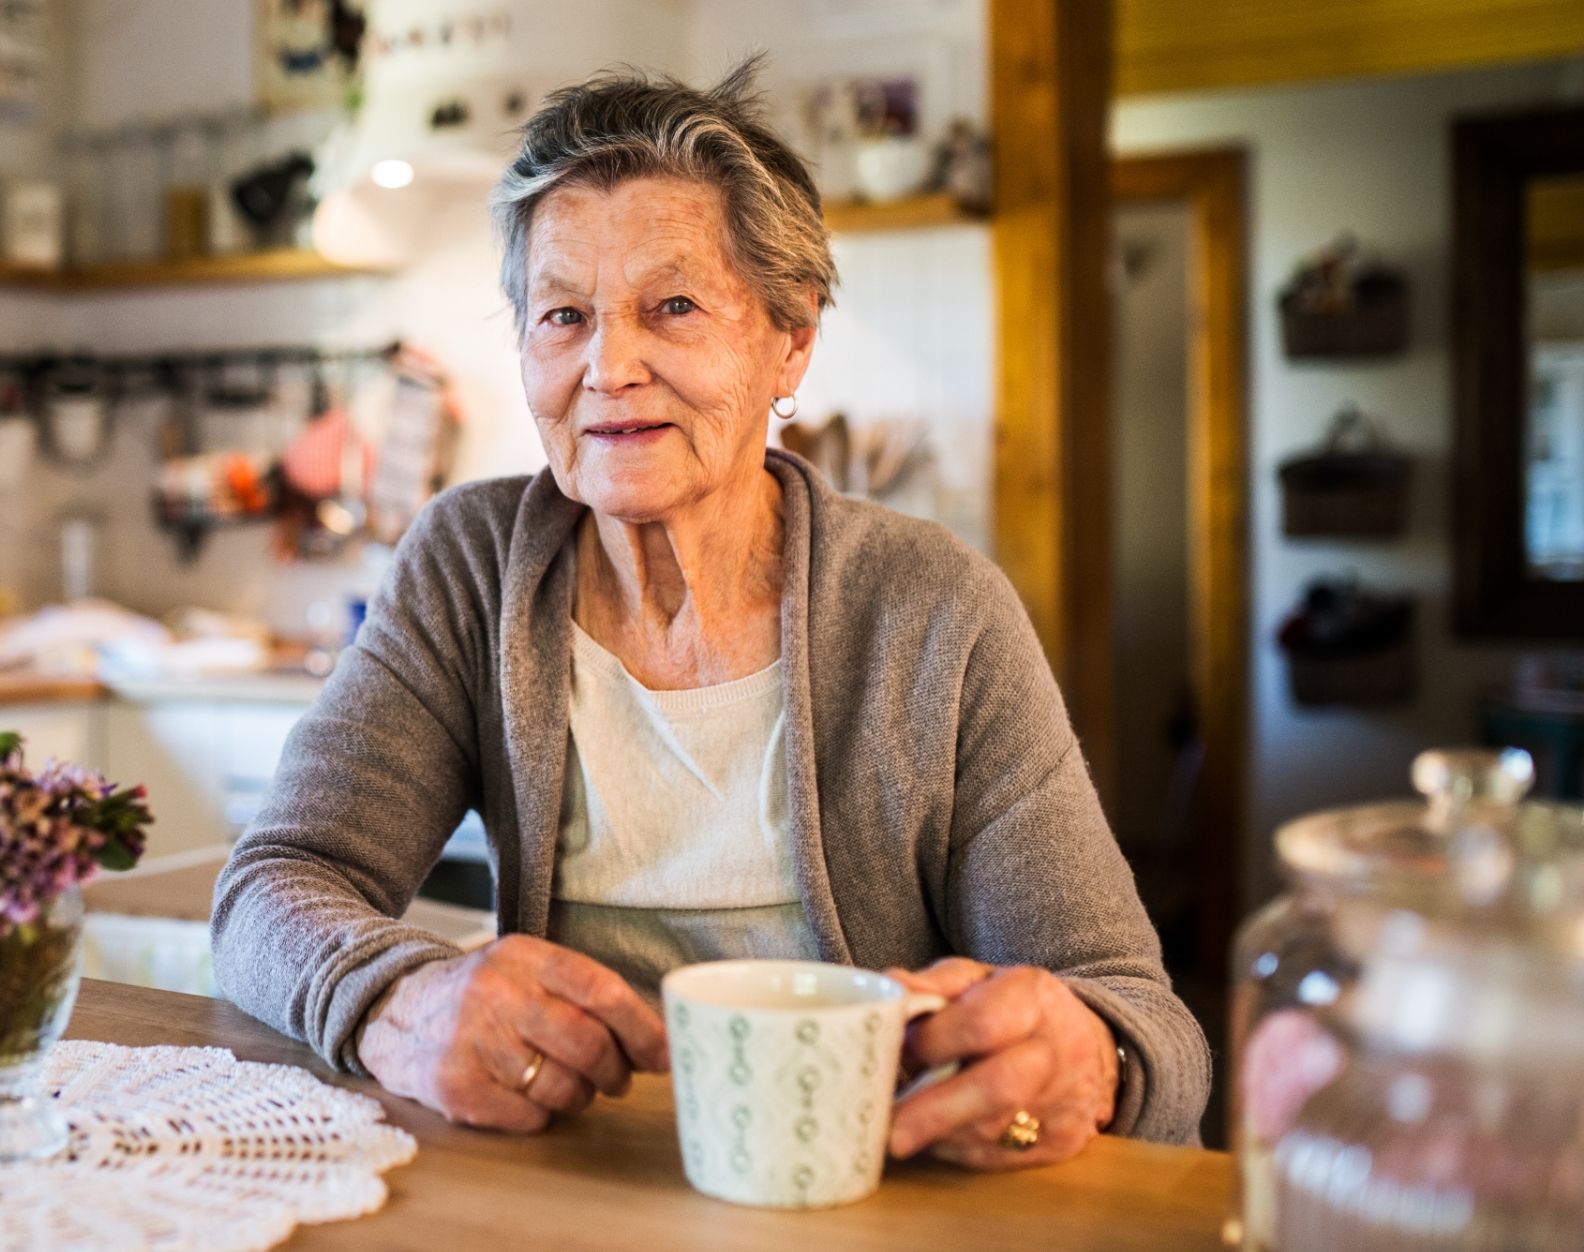 Older adult woman enjoys cup of coffee at her table